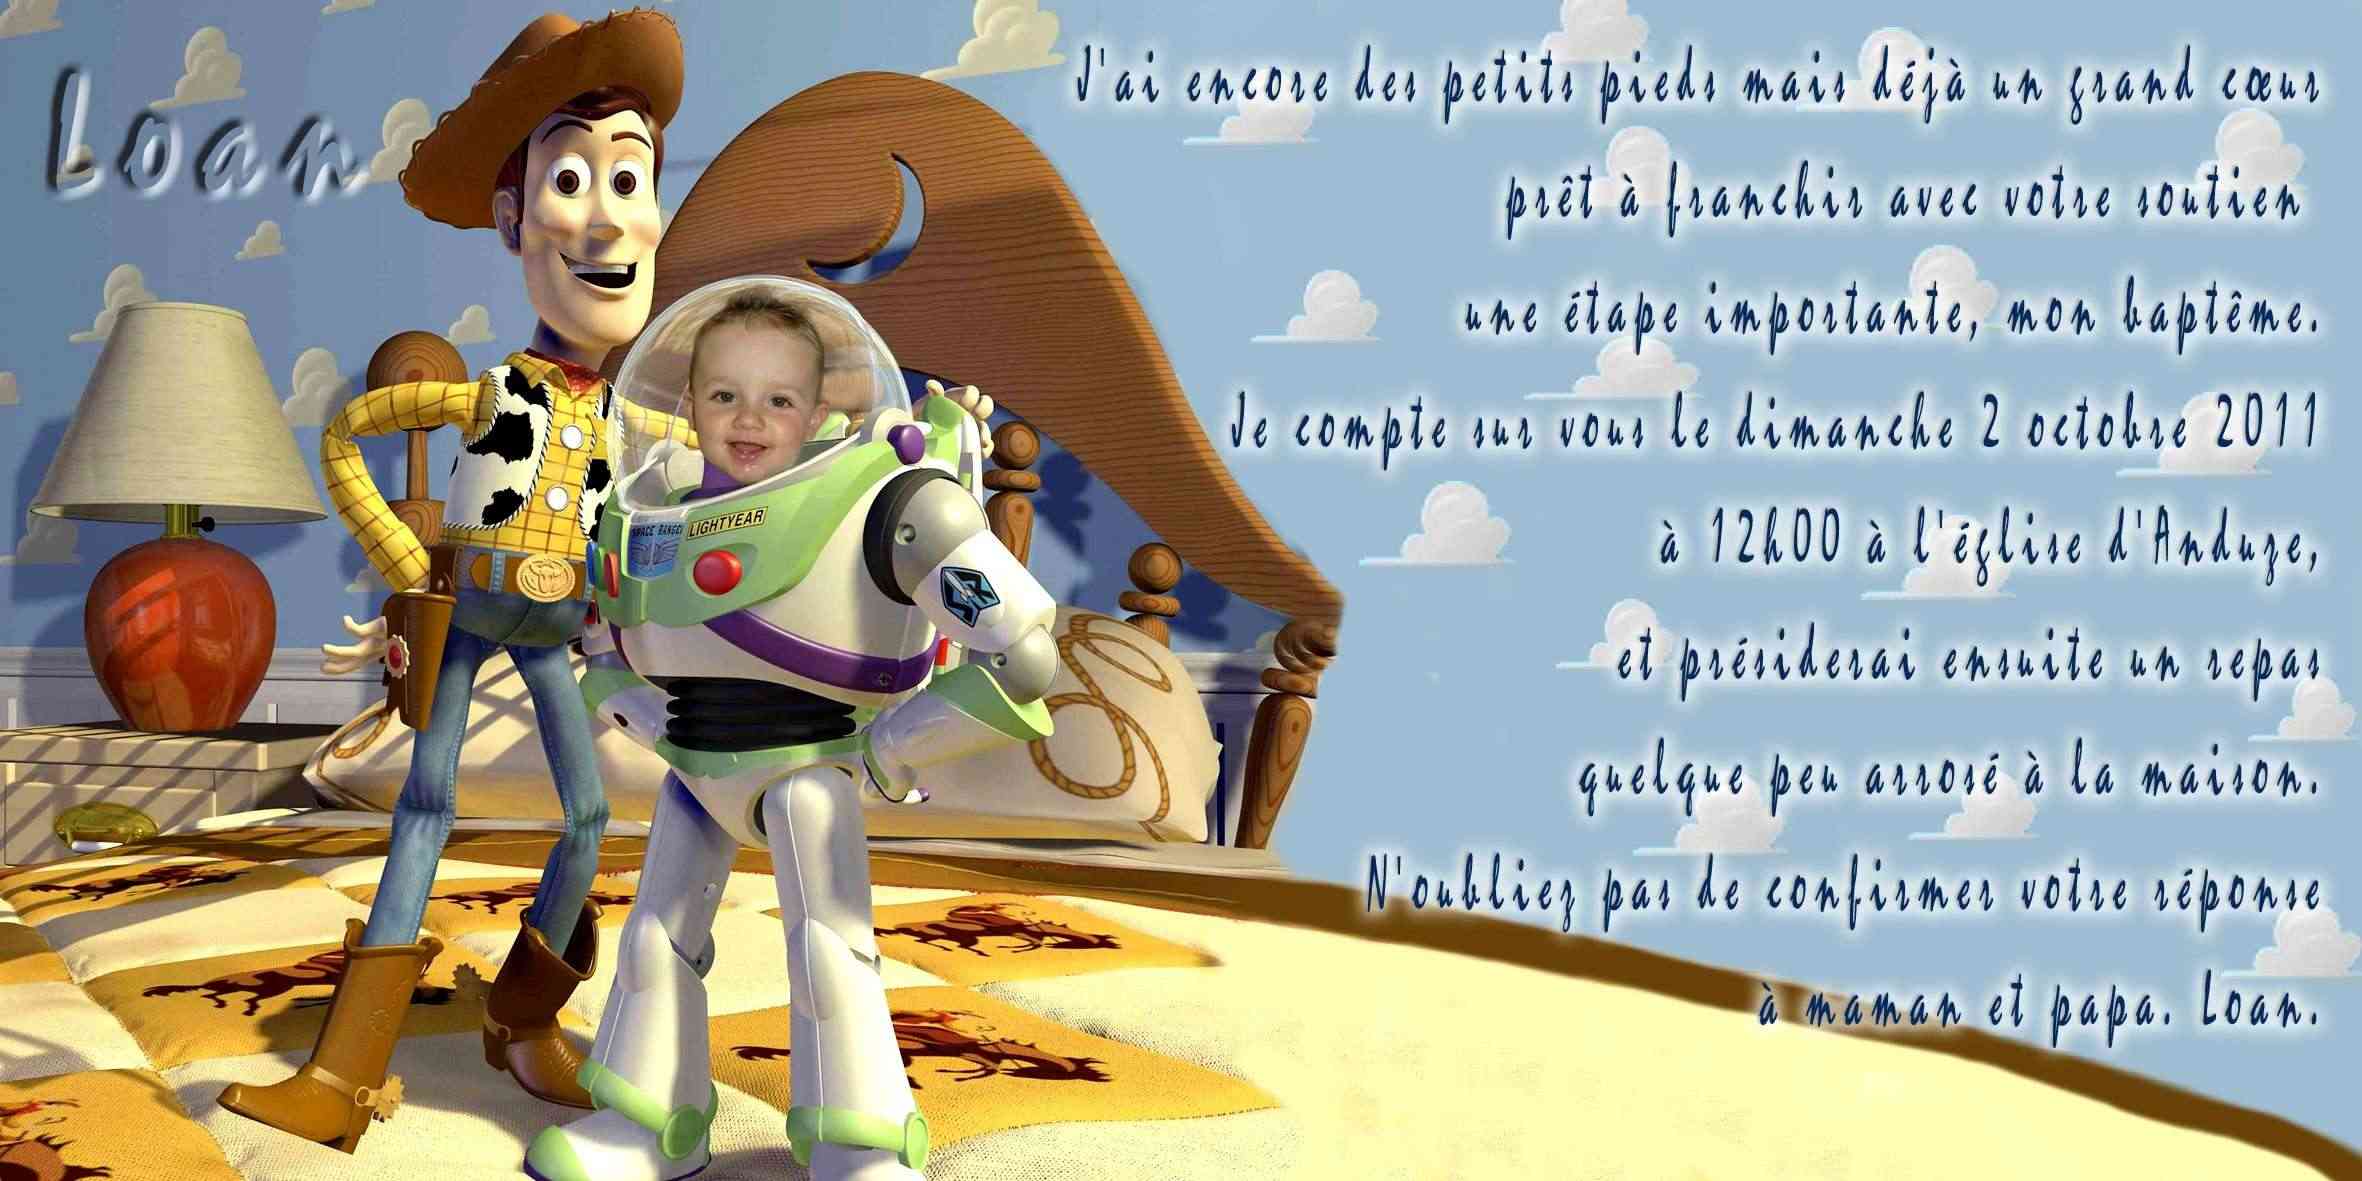 Montage photos faire part toy story Toy_st13